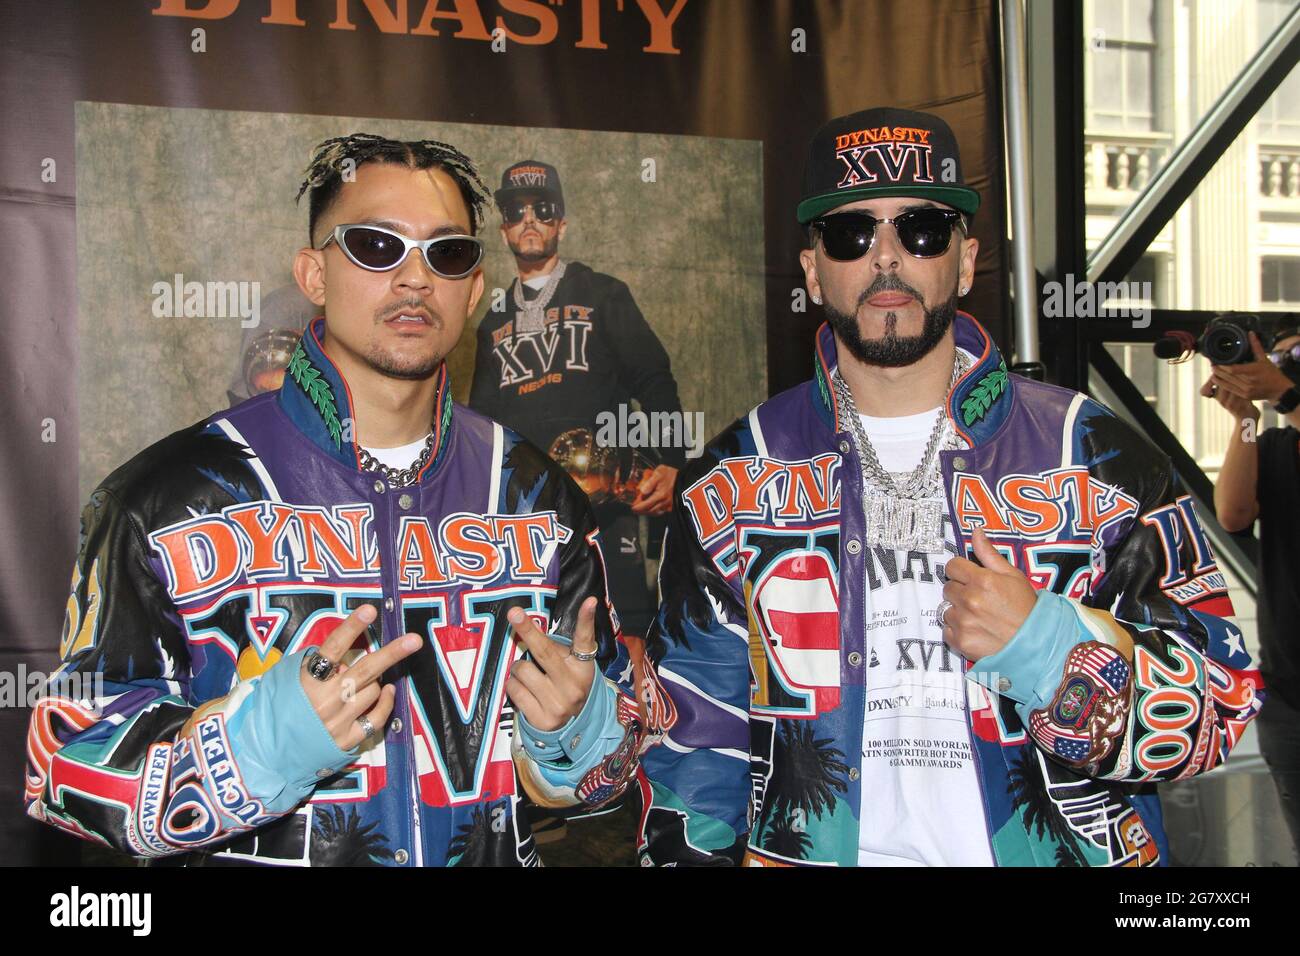 New York, NY, USA. 16th July, 2021. Tainy & Yandel press conference and meet and greet promoting the premiere of album 'Dynasty' at PUMA NYC Flagship Store in New York City on July 16, 2021. Credit: Erik Nielsen/Media Punch/Alamy Live News Stock Photo